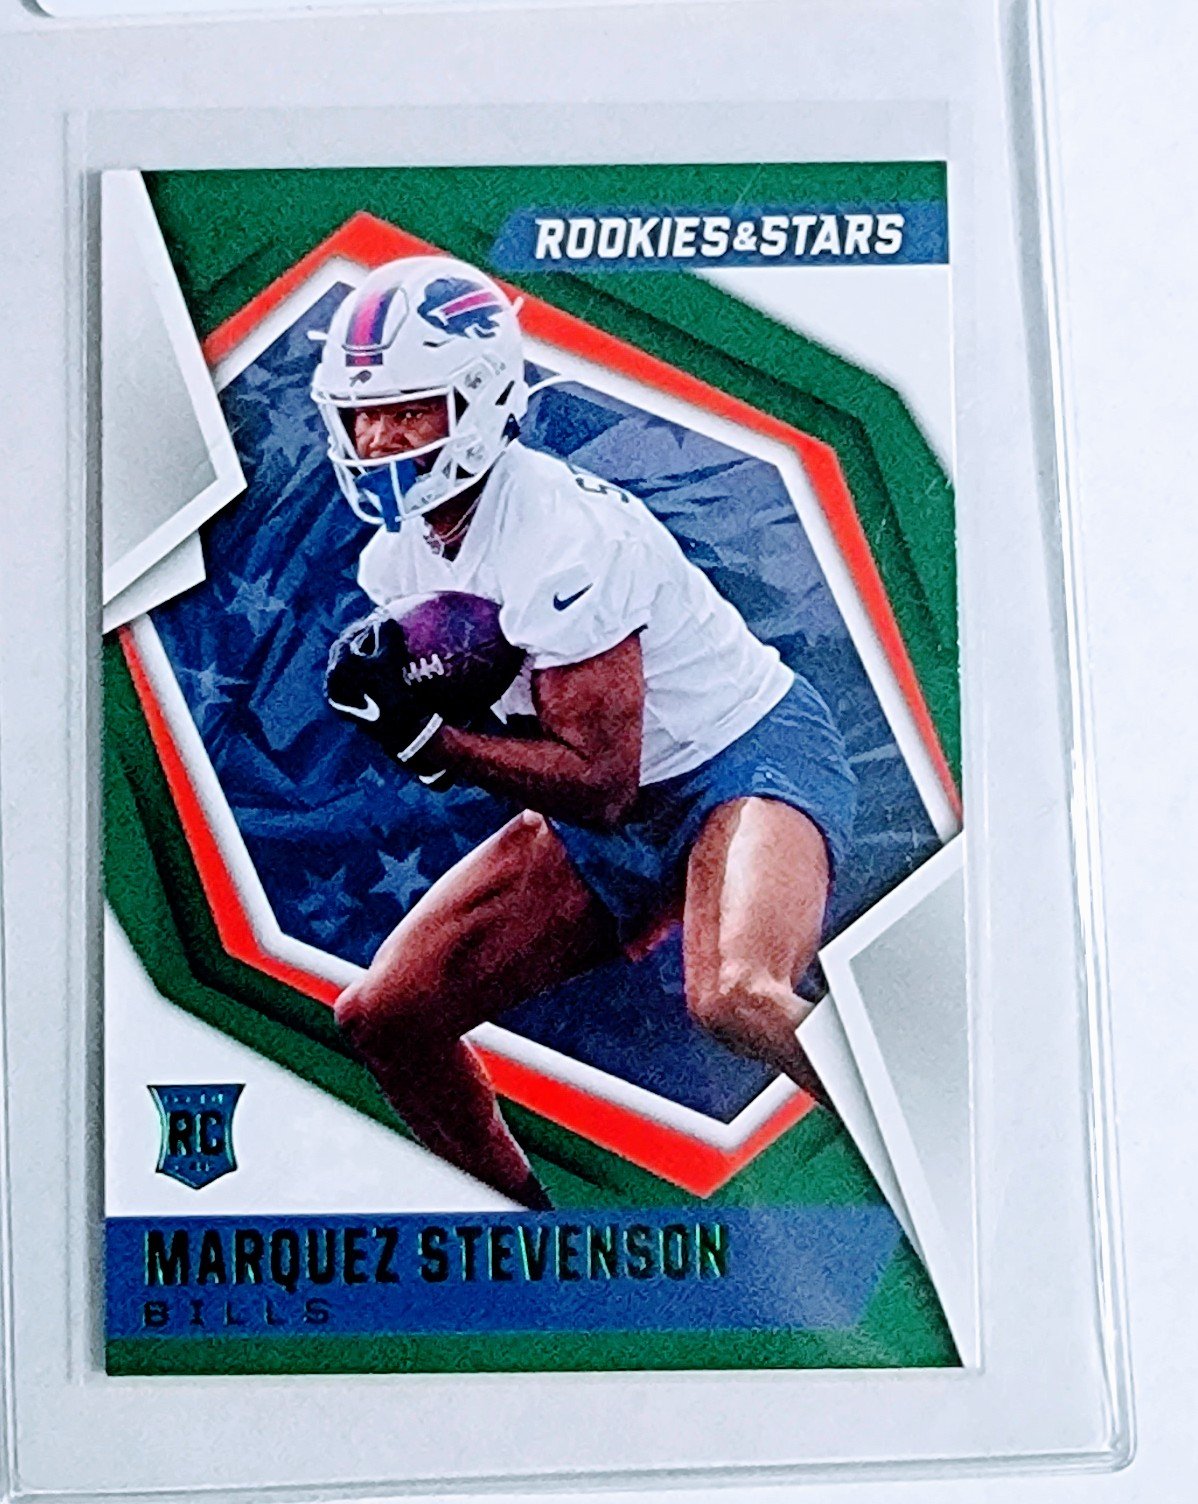 2021 Panini Rookies and Stars Marquez Stephenson Green Rookie Football Card AVM1 simple Xclusive Collectibles   